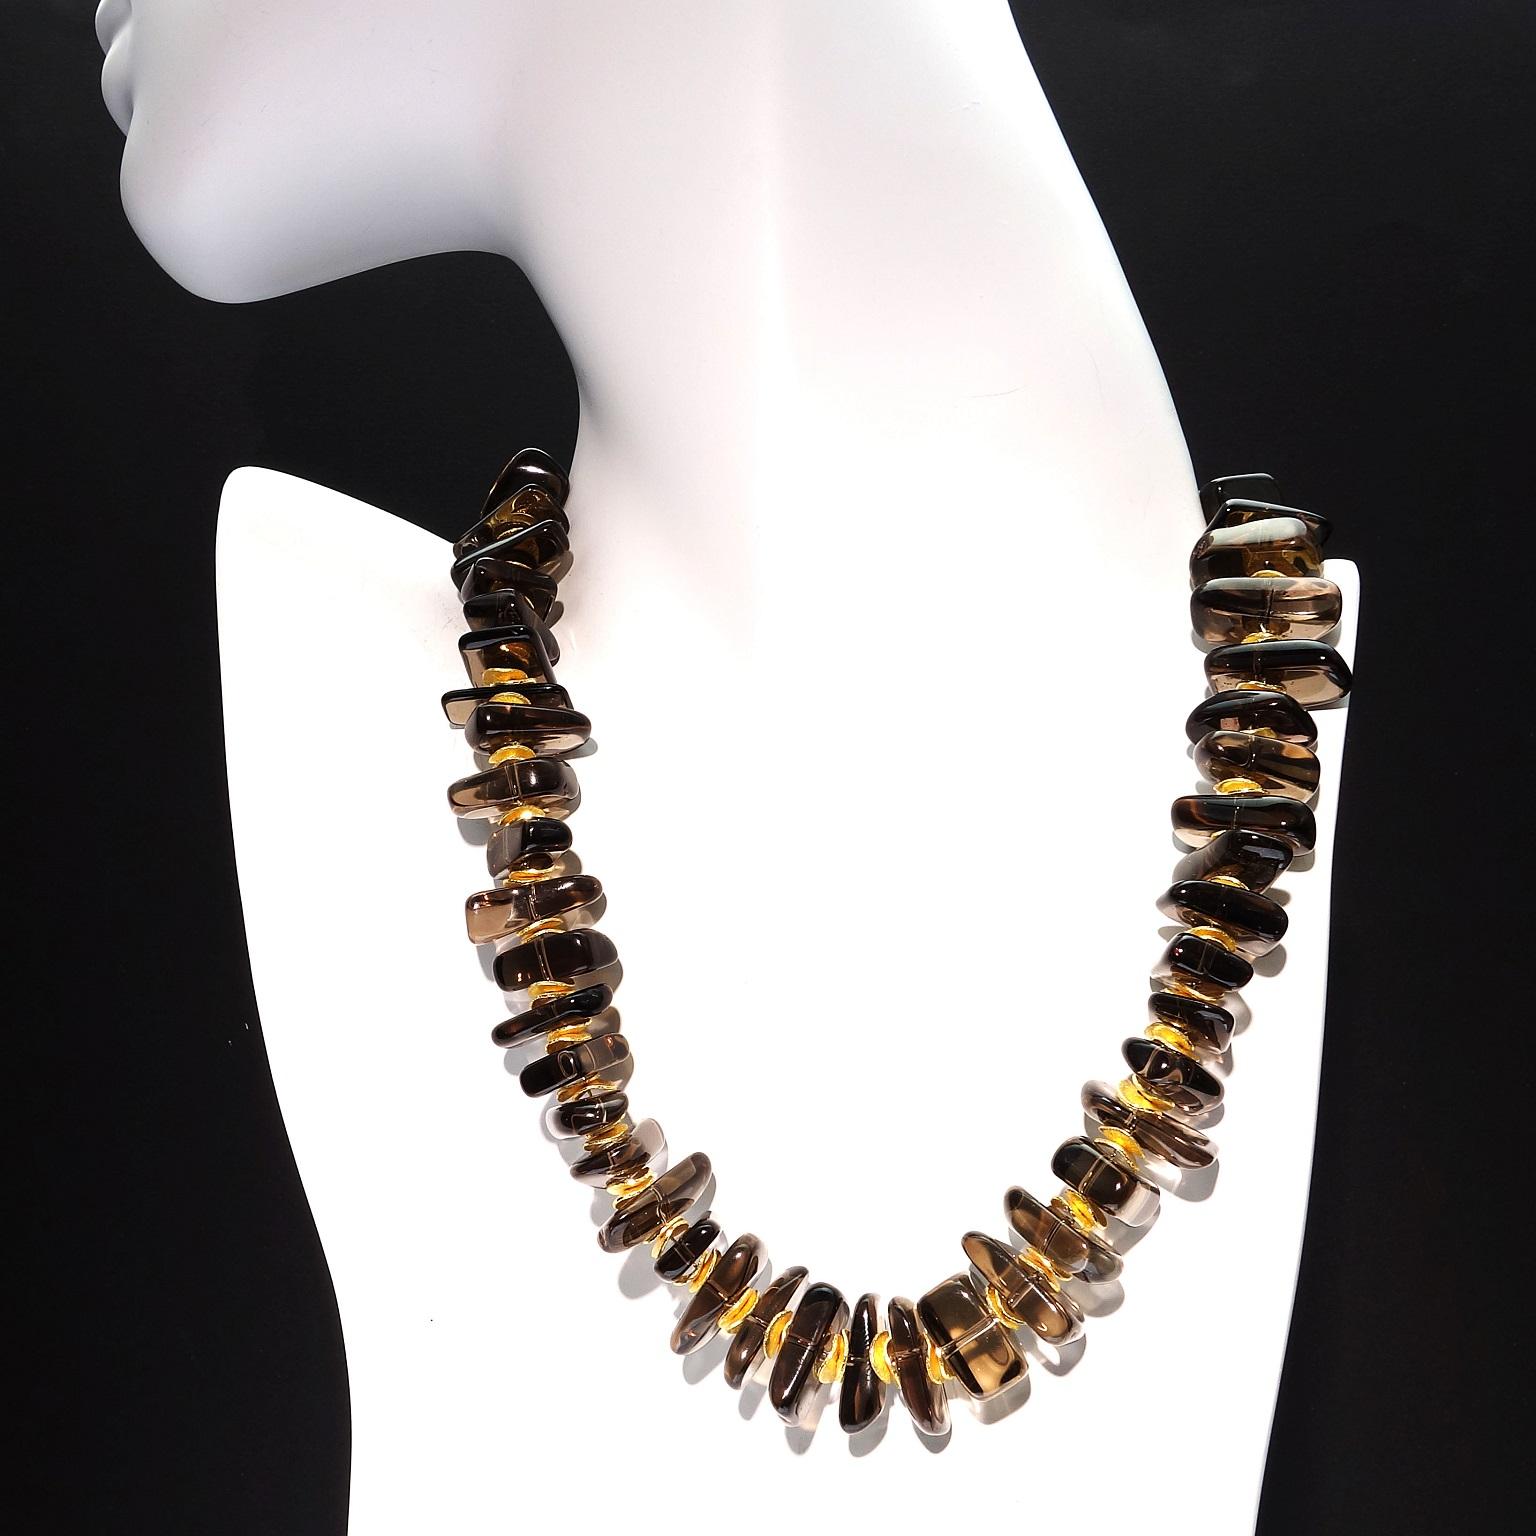 Artisan AJD 16 Inch Highly Polished Smoky Quartz and Gold Choker Necklace